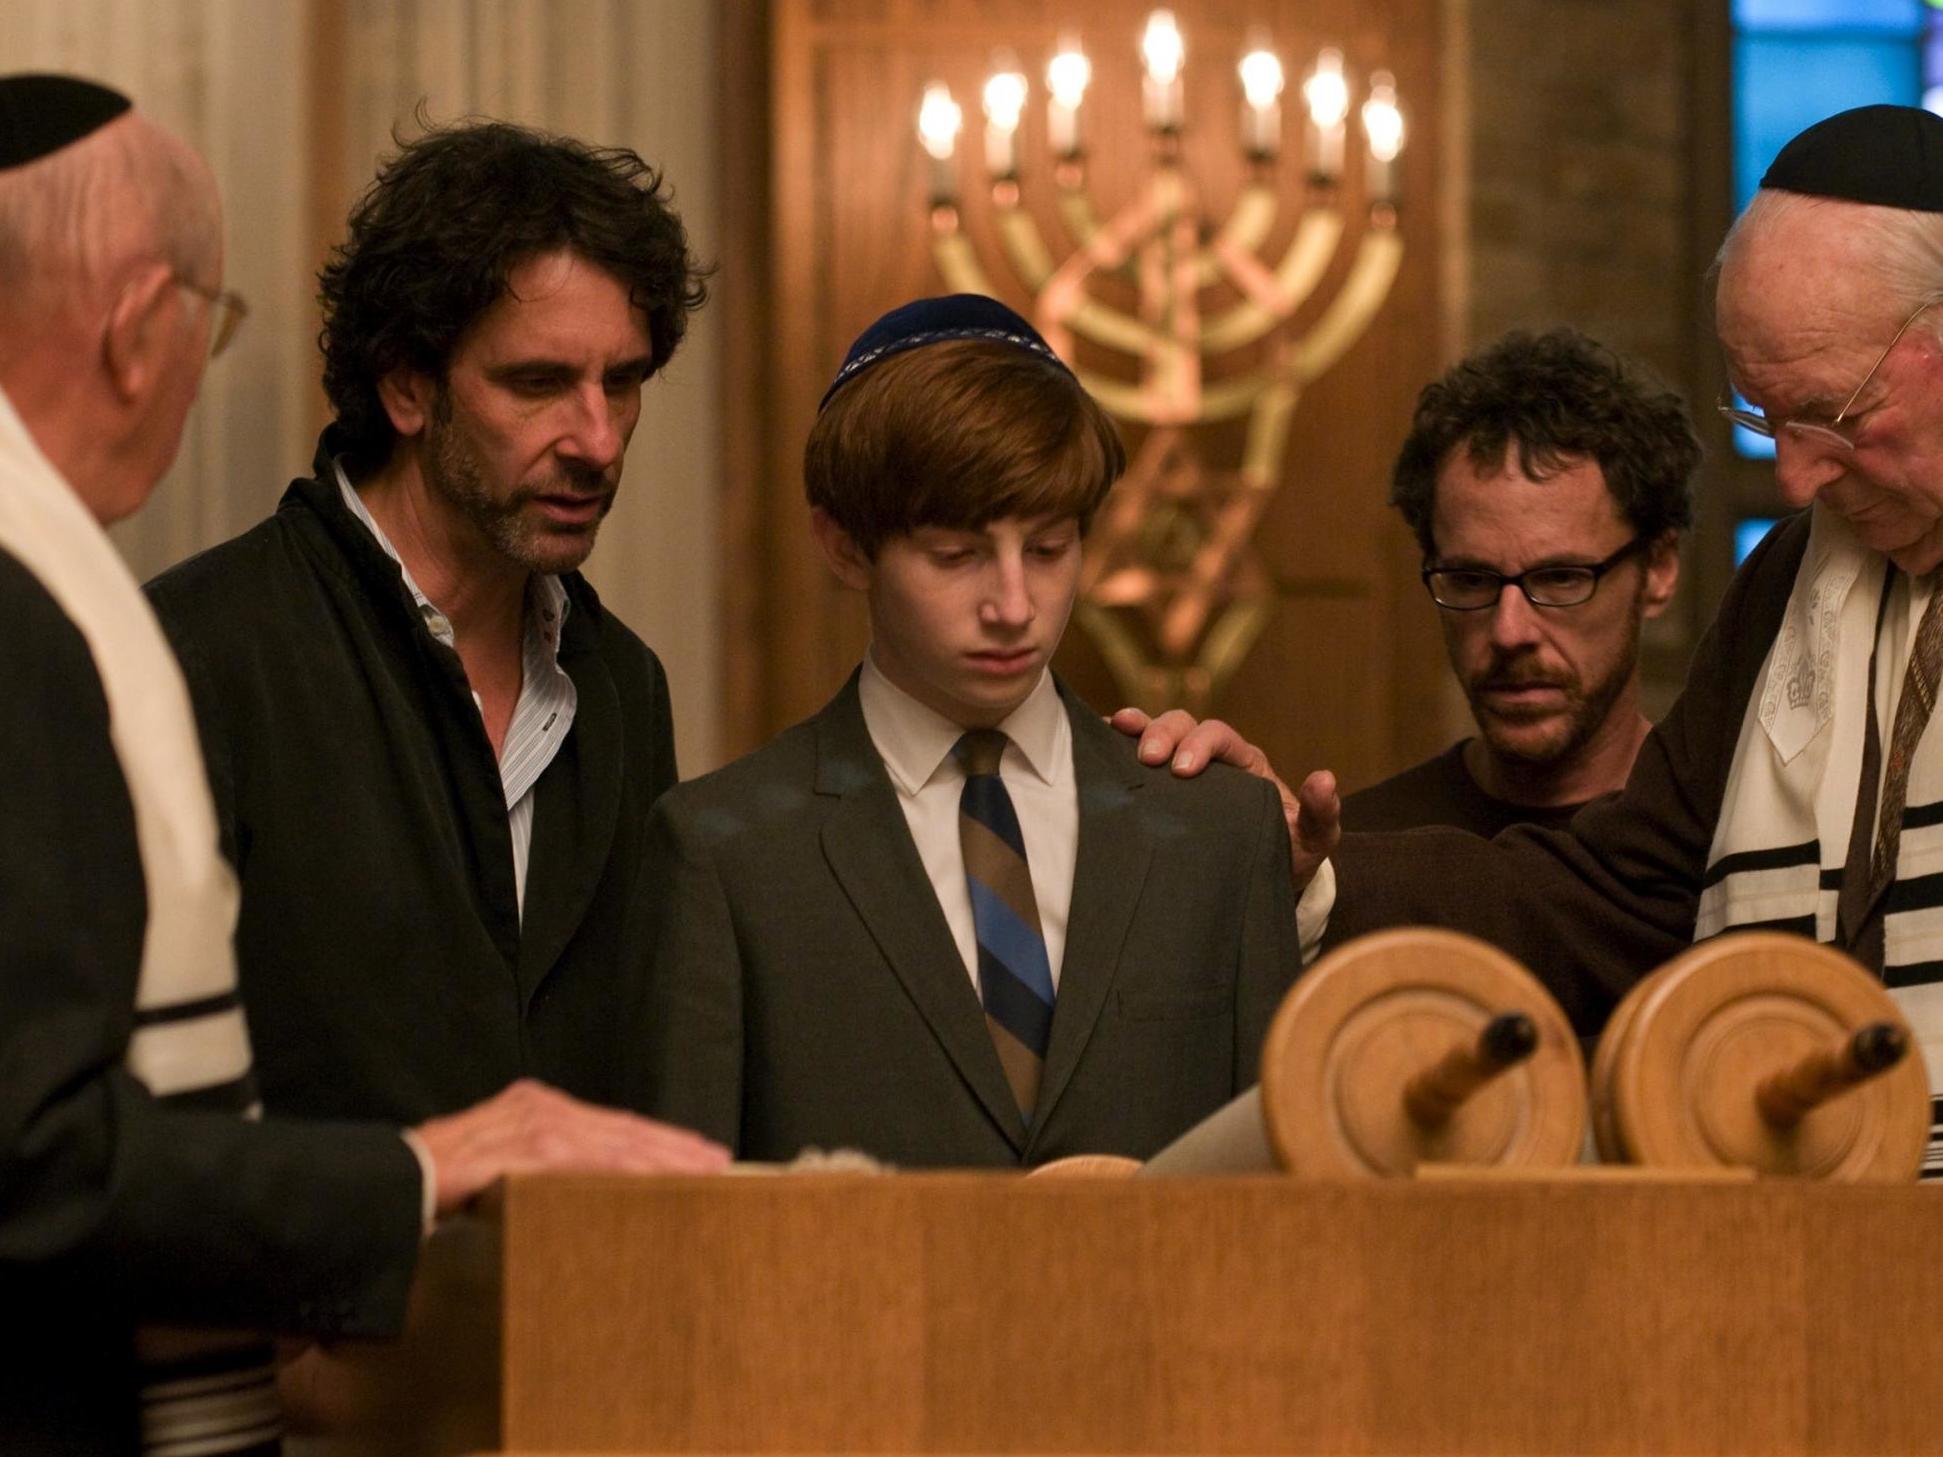 The backdrop to their upbringing: Joel and Ethan Coen direct Aaron Wolff (Danny) on set